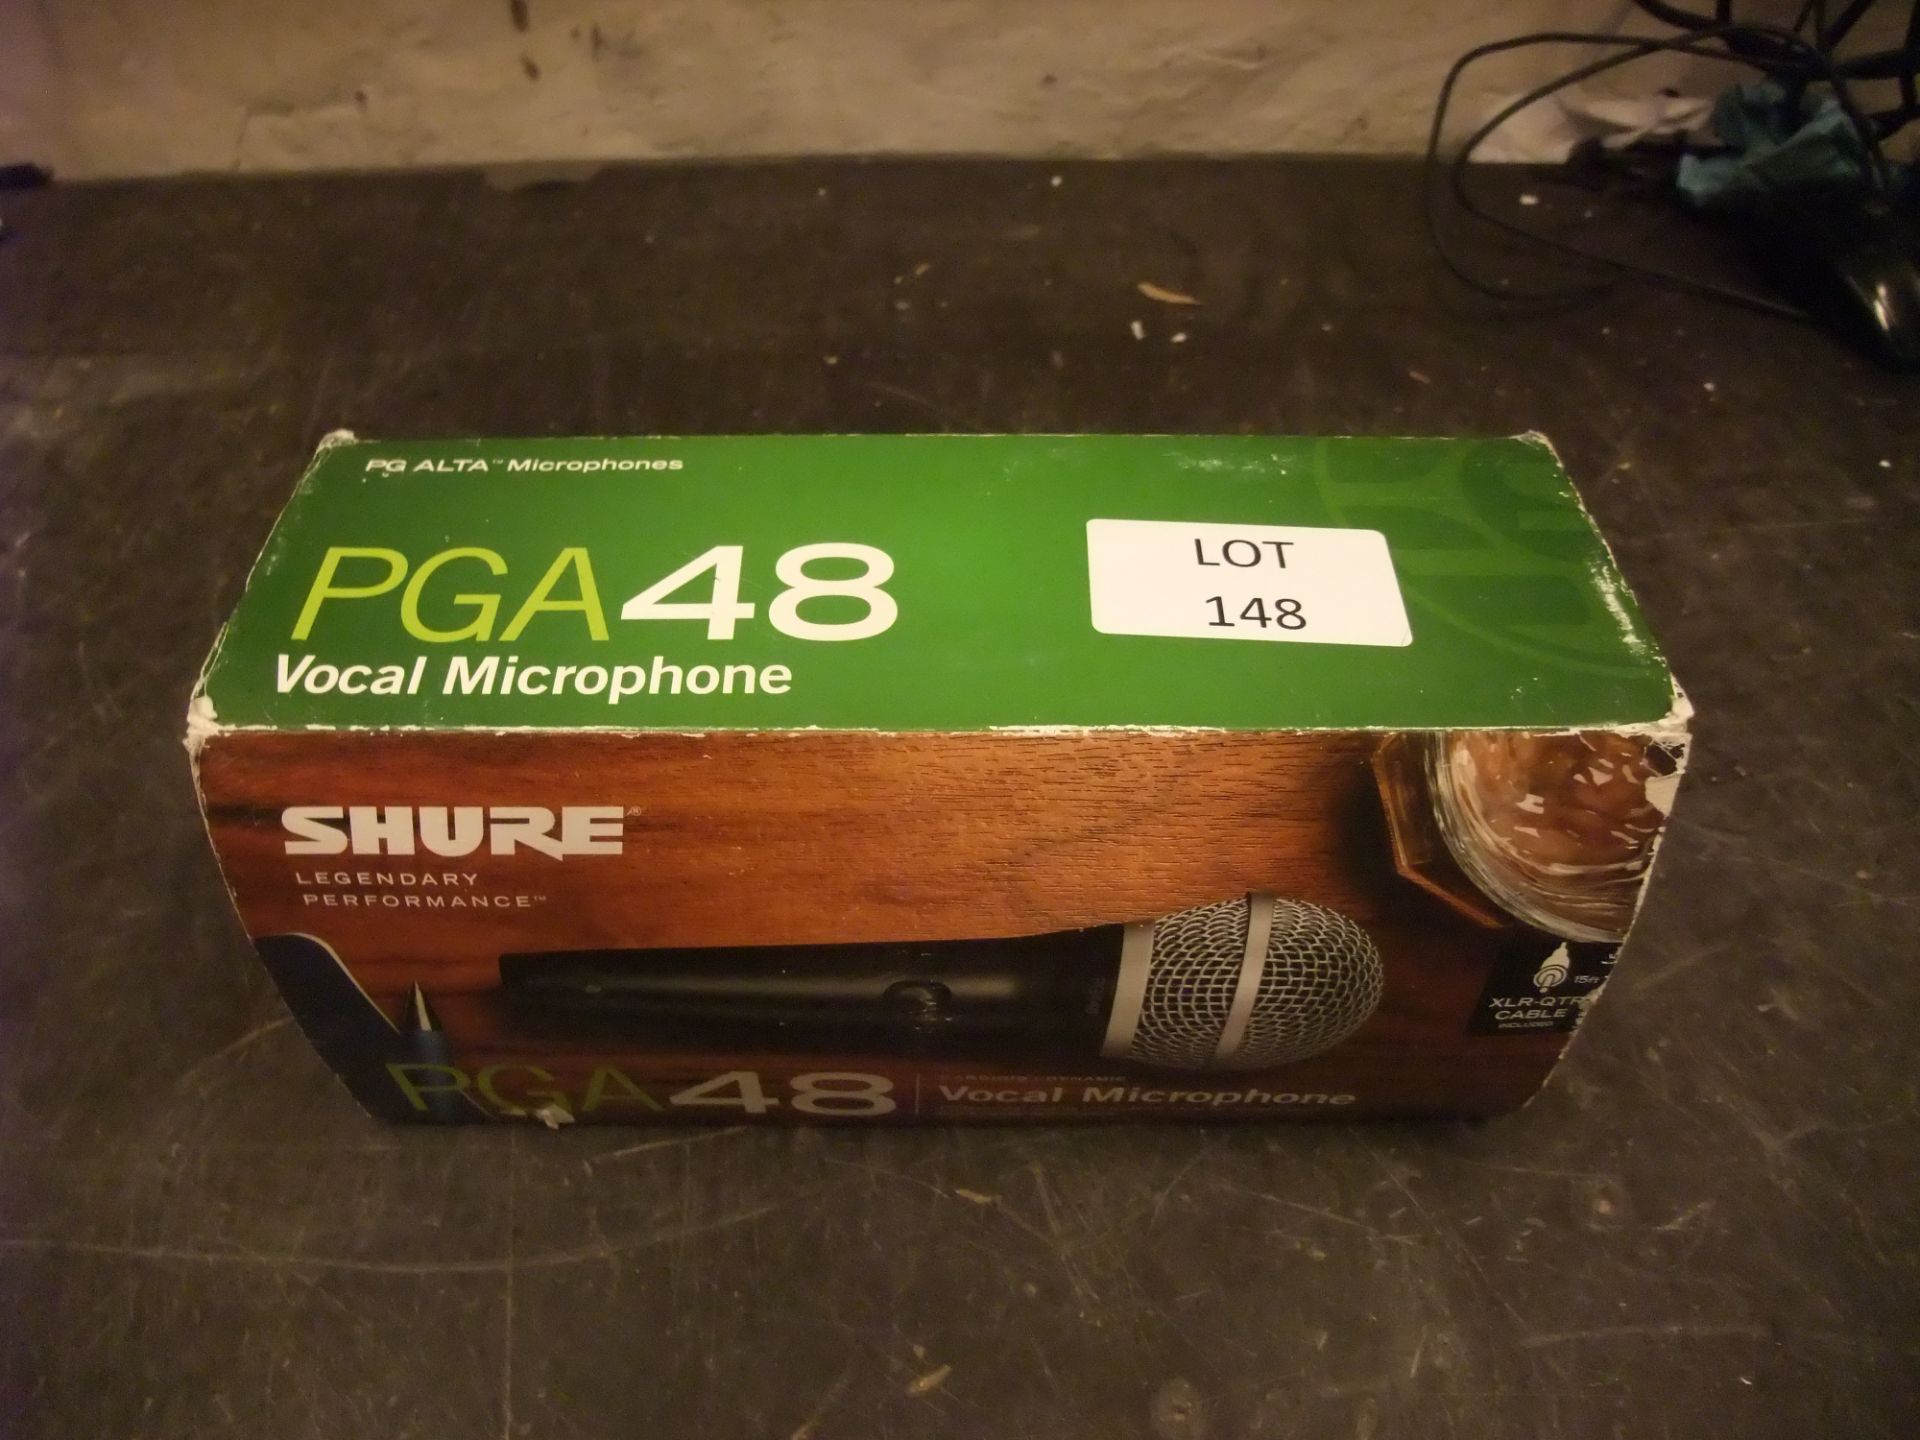 Shure PGA48 Vocal Microphone (complete with box) (